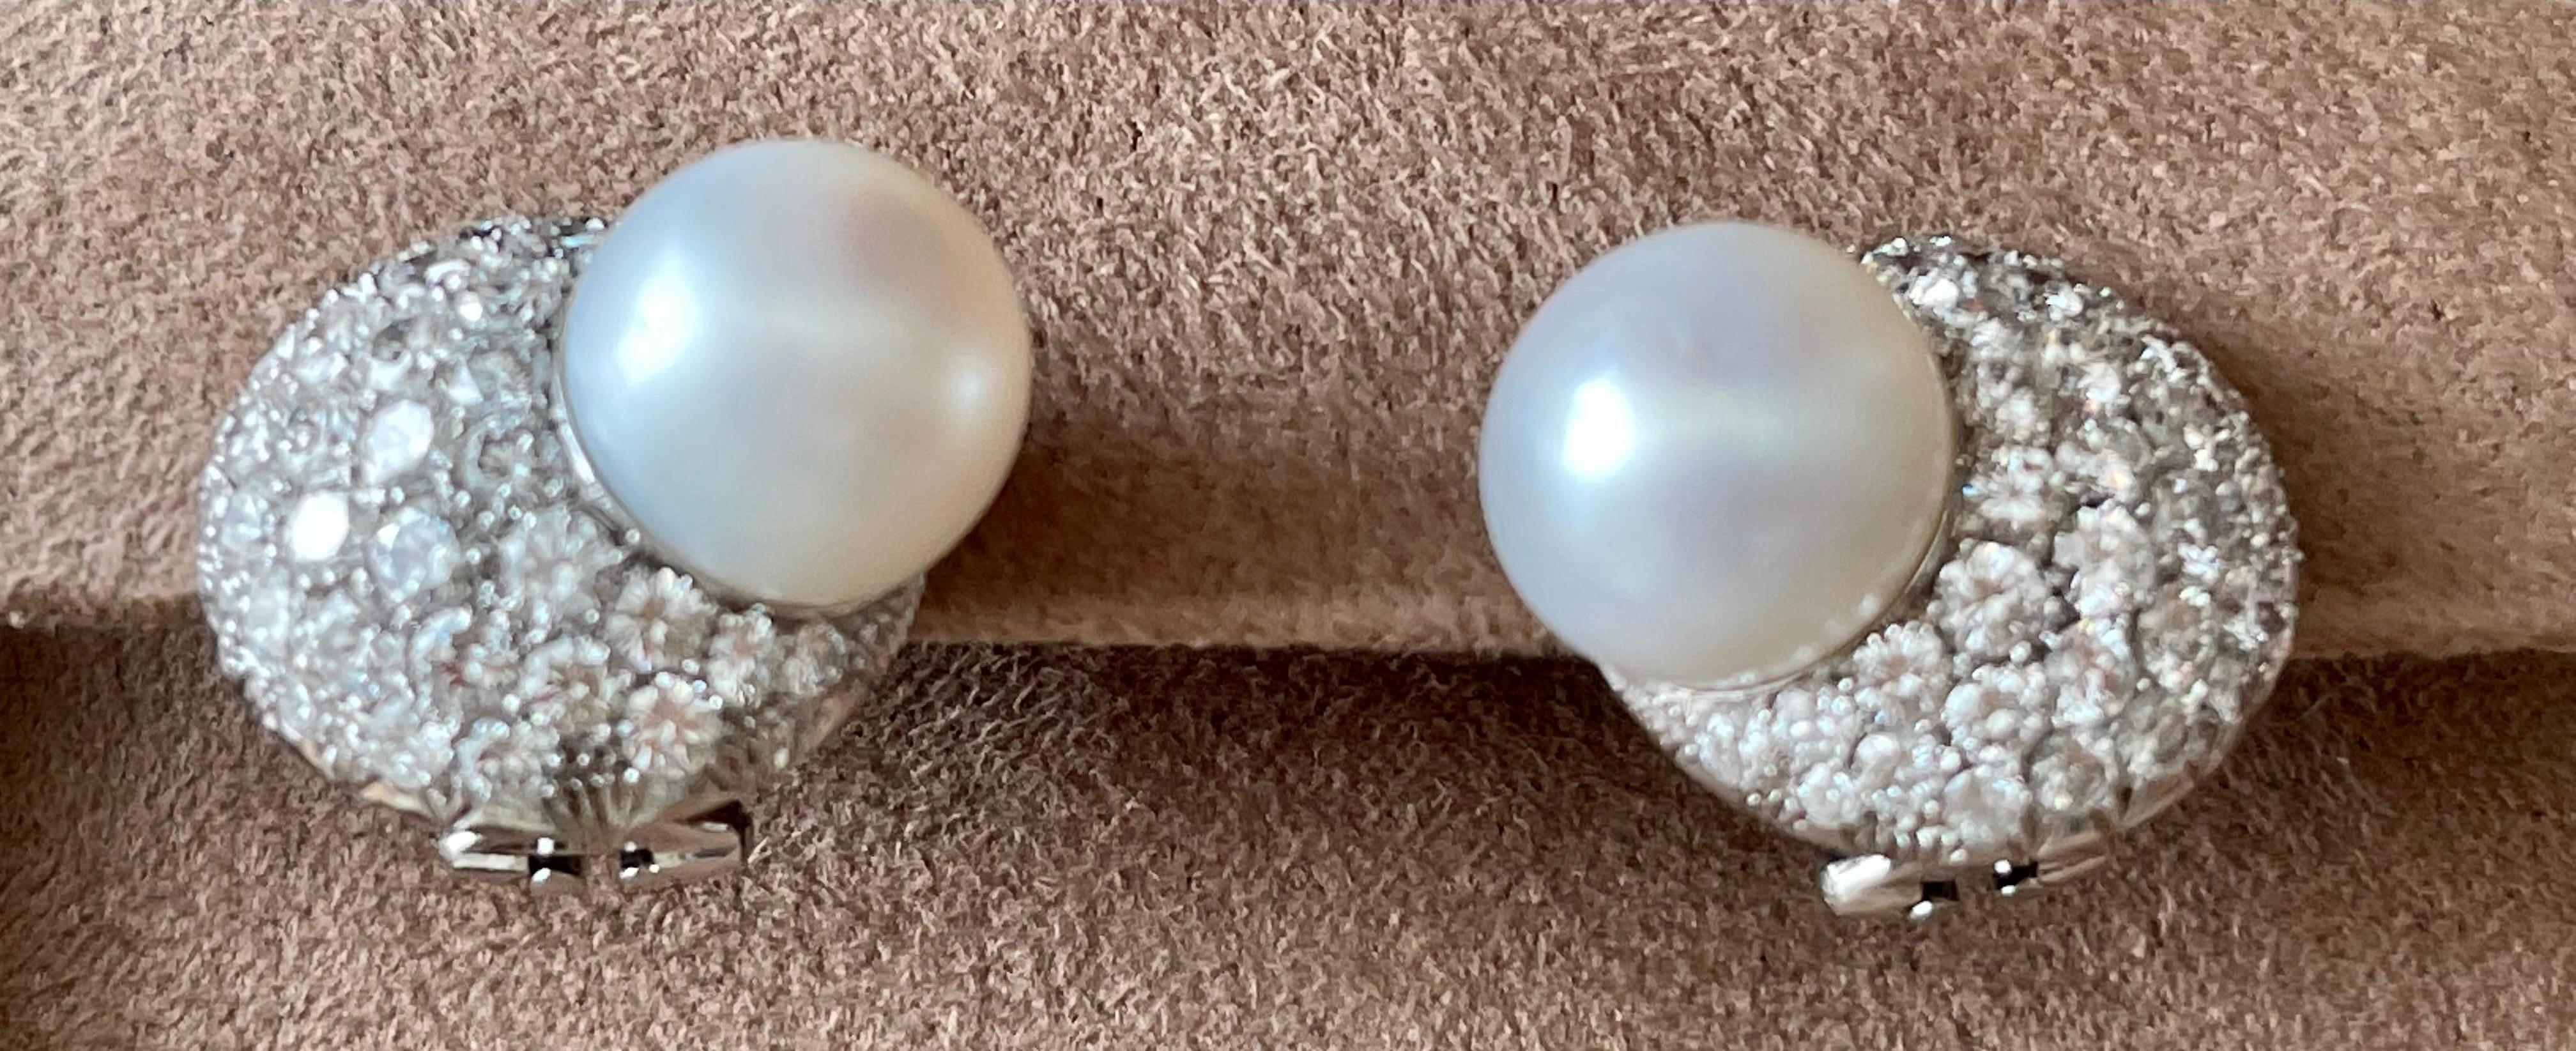 Stunning diamond and South Sea pearl earrings fashioned in 18 K white Gold. The 11 mm South Sea pearls are surrounded by 81 pave set brilliant cut Diamonds. The diamonds weigh approximately 3.30 carat total weight and are graded F-G color and VS